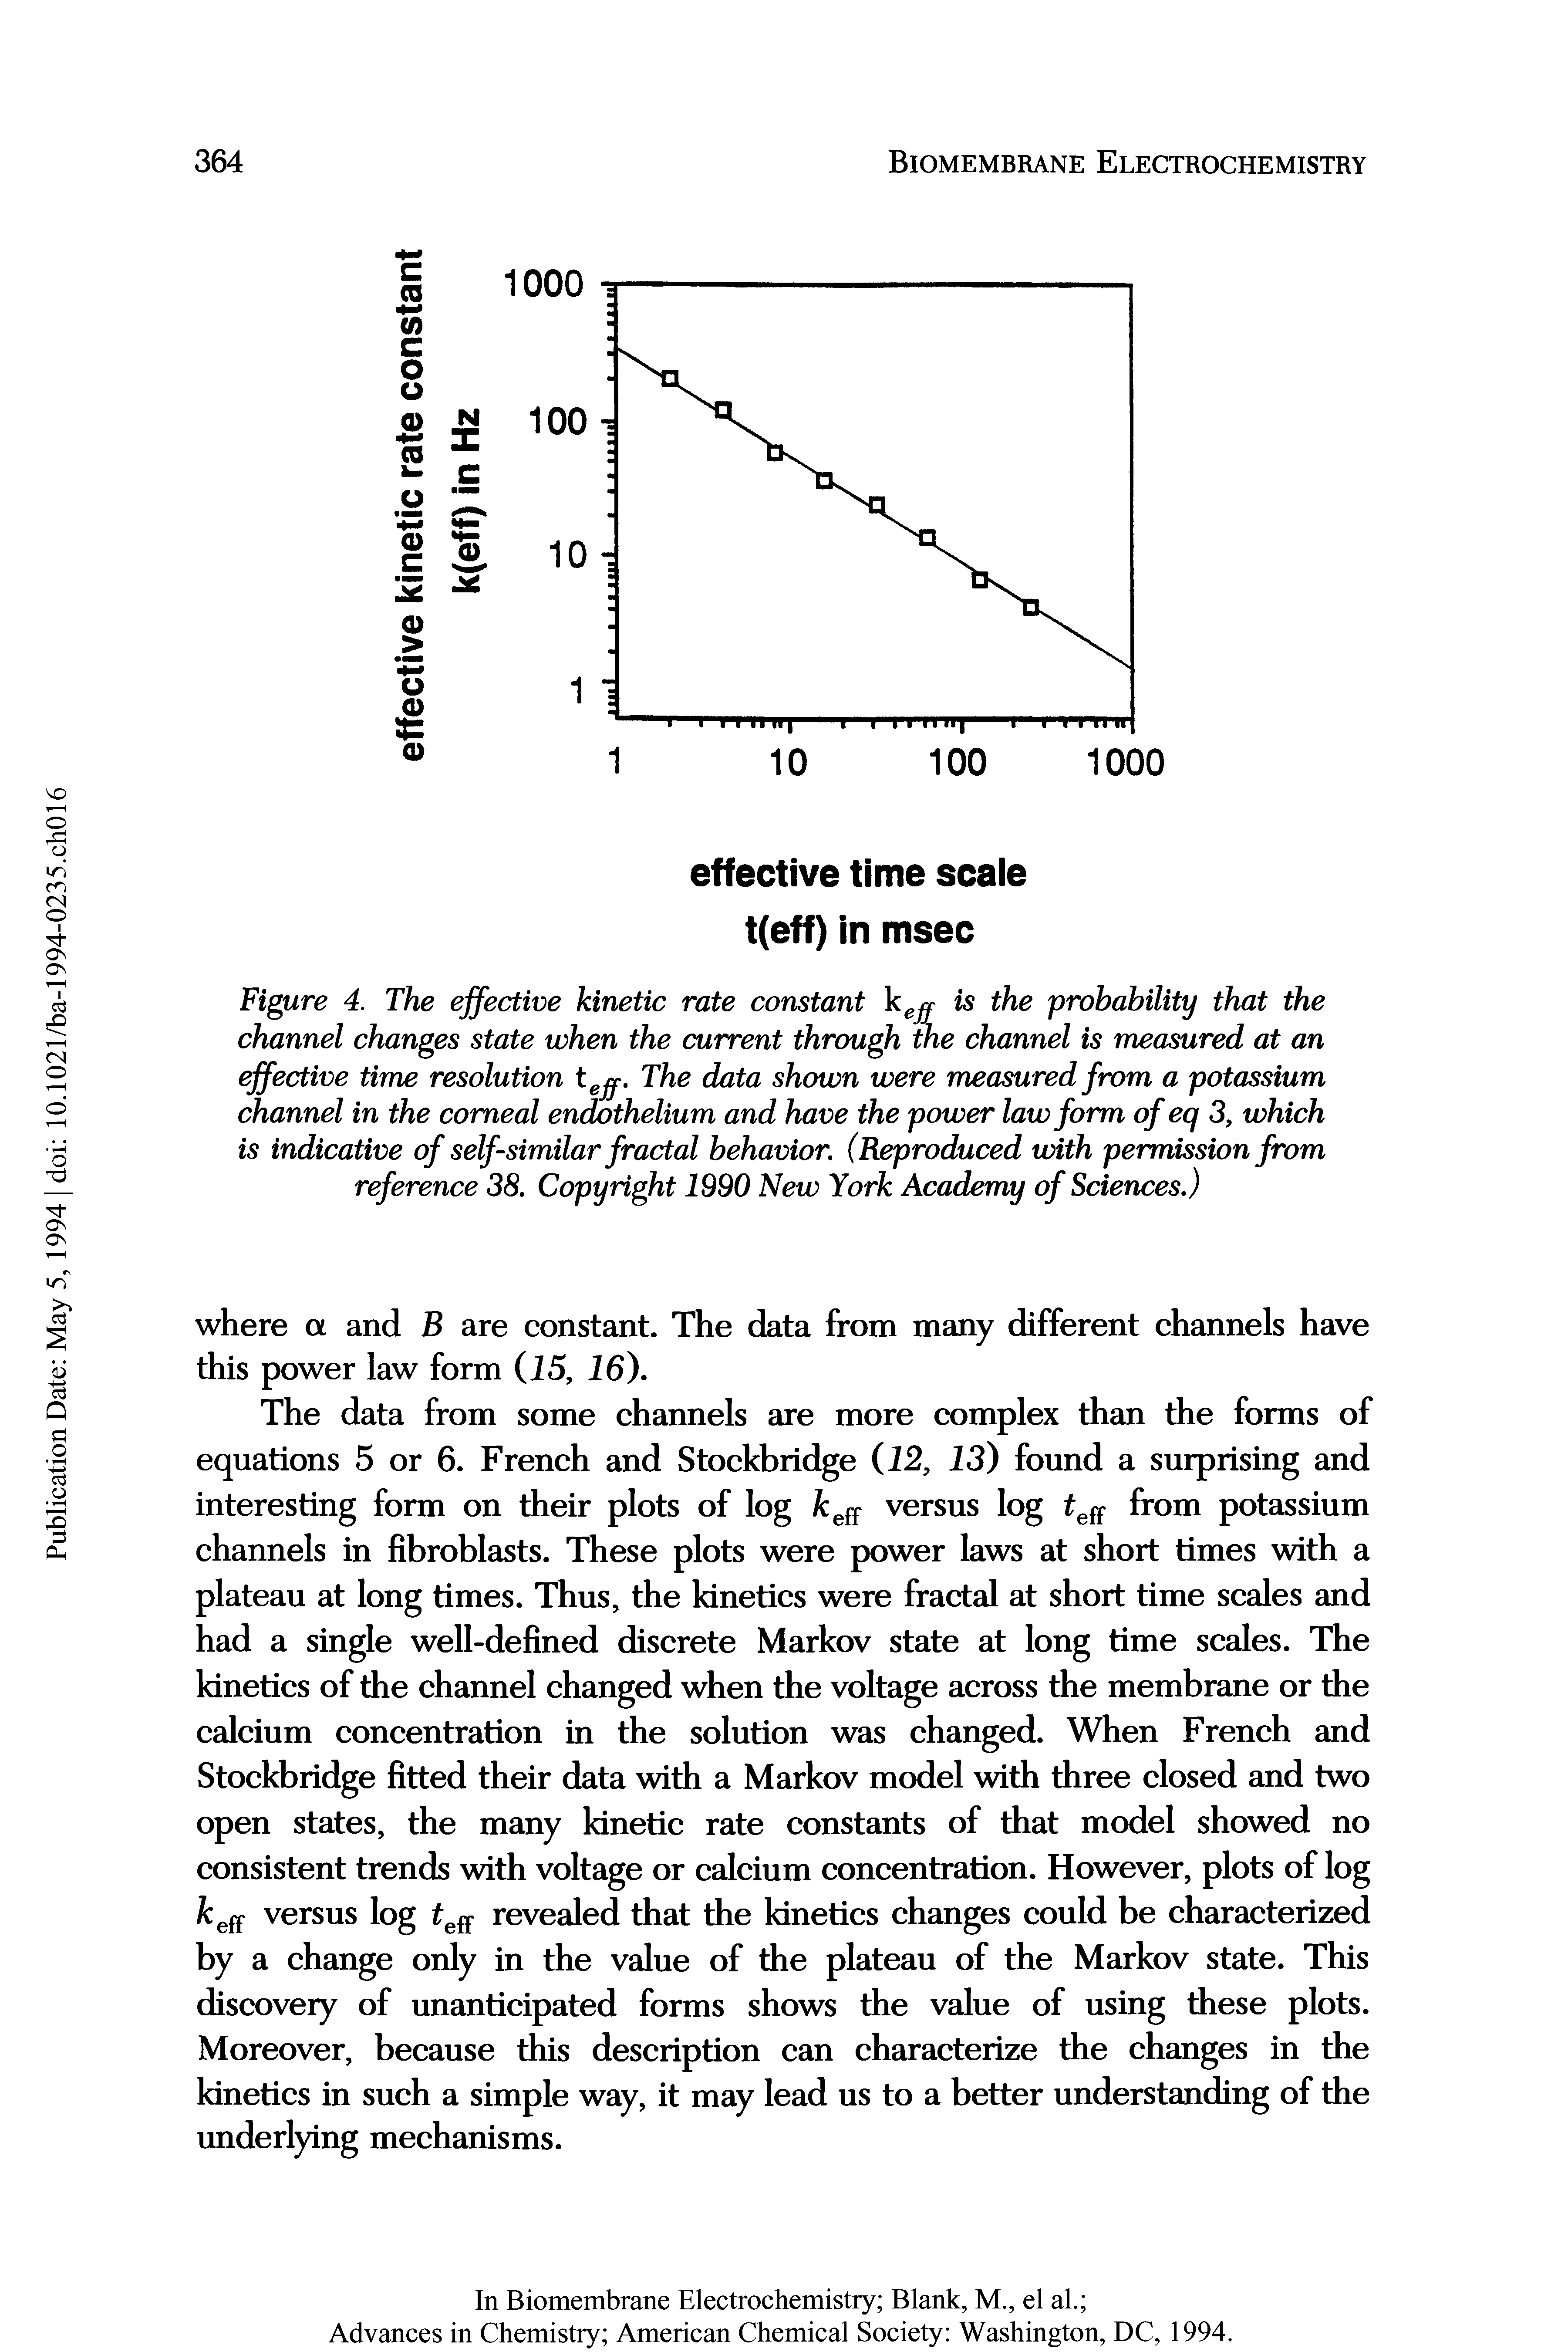 Figure 4. The effective kinetic rate constant is the probability that the channel changes state when the current through the channel is measured at an effective time resolution tejr. The data shown were measured from a potassium channel in the corneal endothelium and have the power law form of eq 3, which is indicative of self-similar fractal behavior. (Reproduced with permission from reference 38. Copyright 1990 New York Academy of Sciences.)...